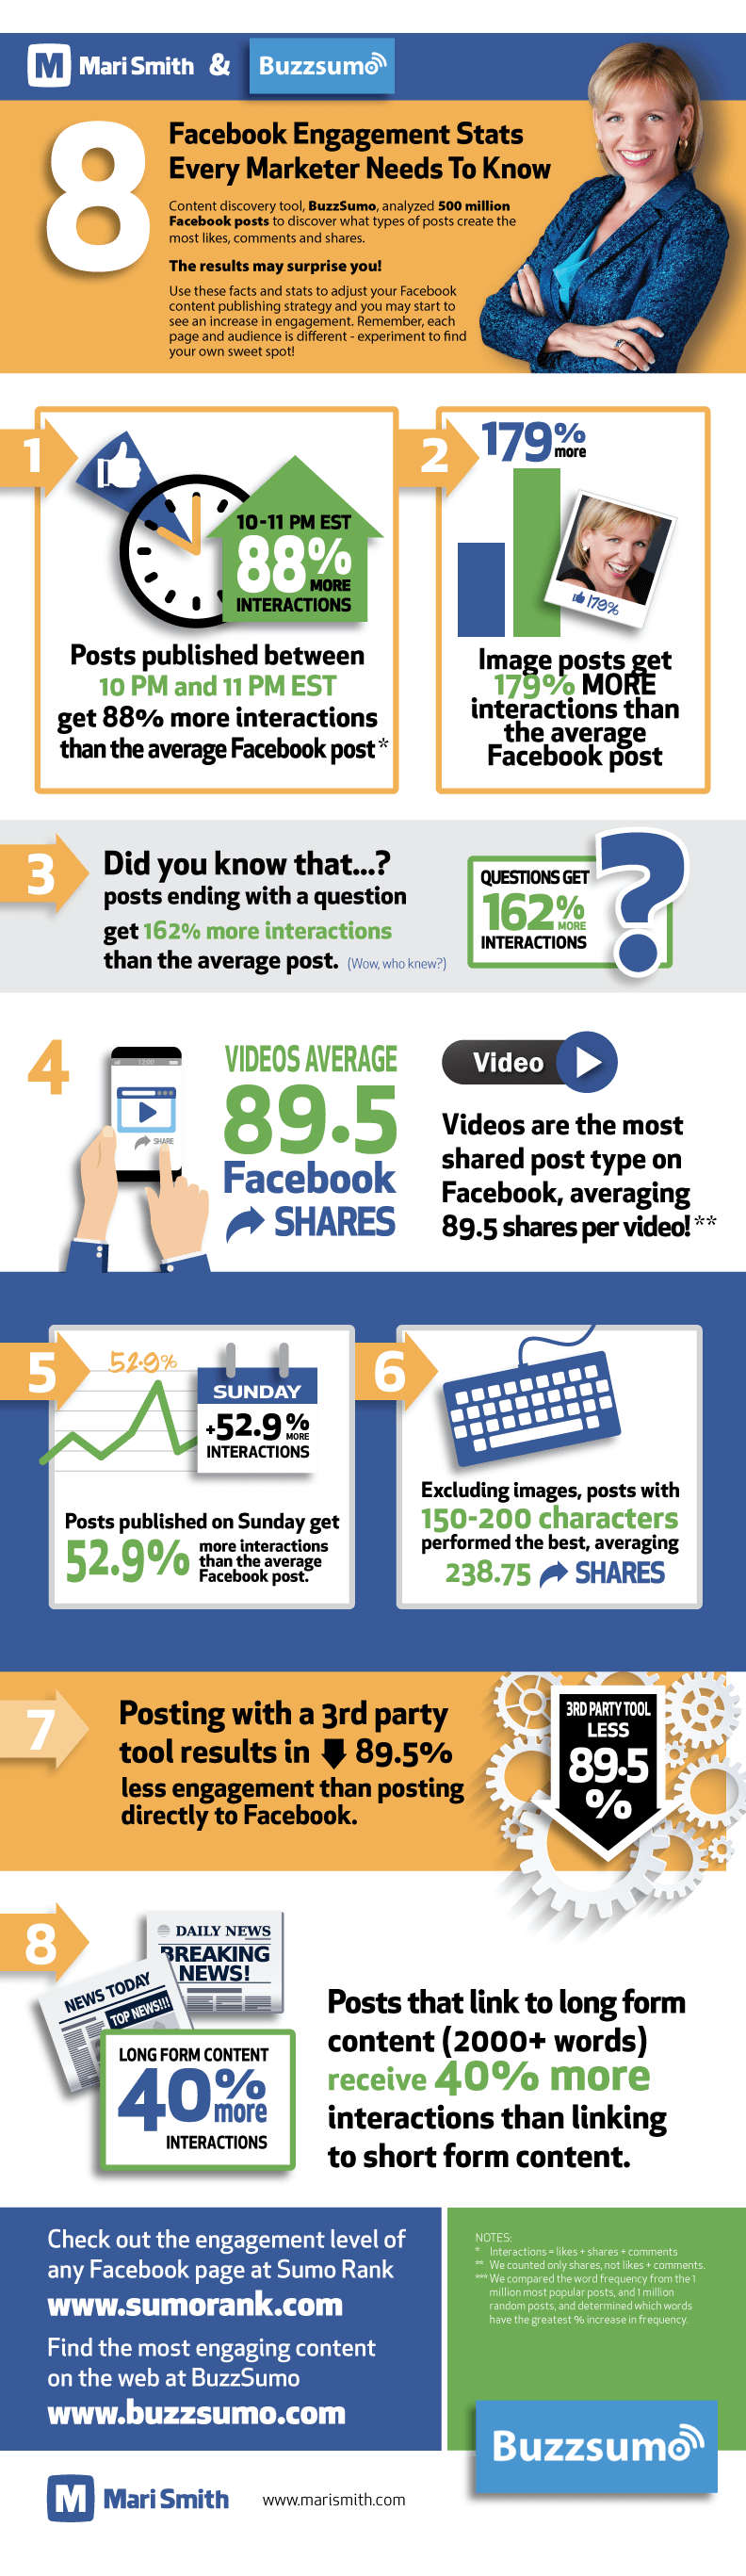 8 facebook engagement stats infographic